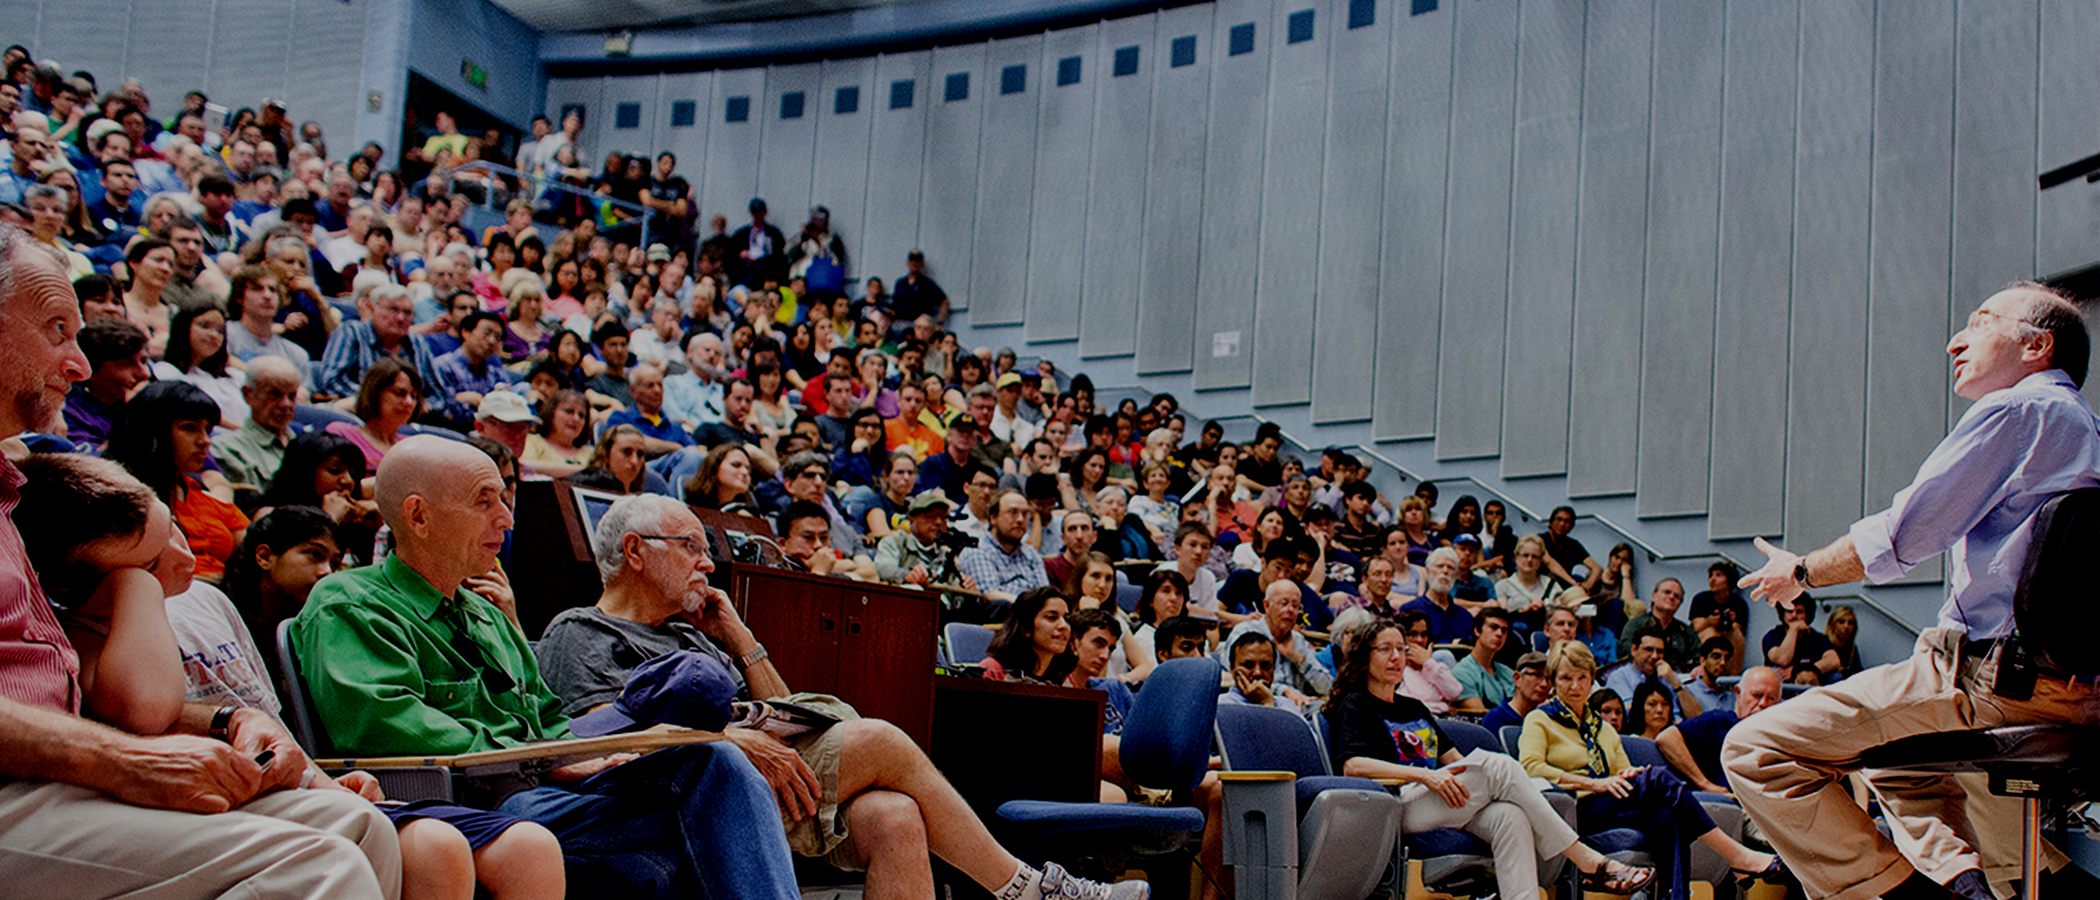 Saul Perlmutter facing lecture hall.  Image used for Excellence in Research research highlight.